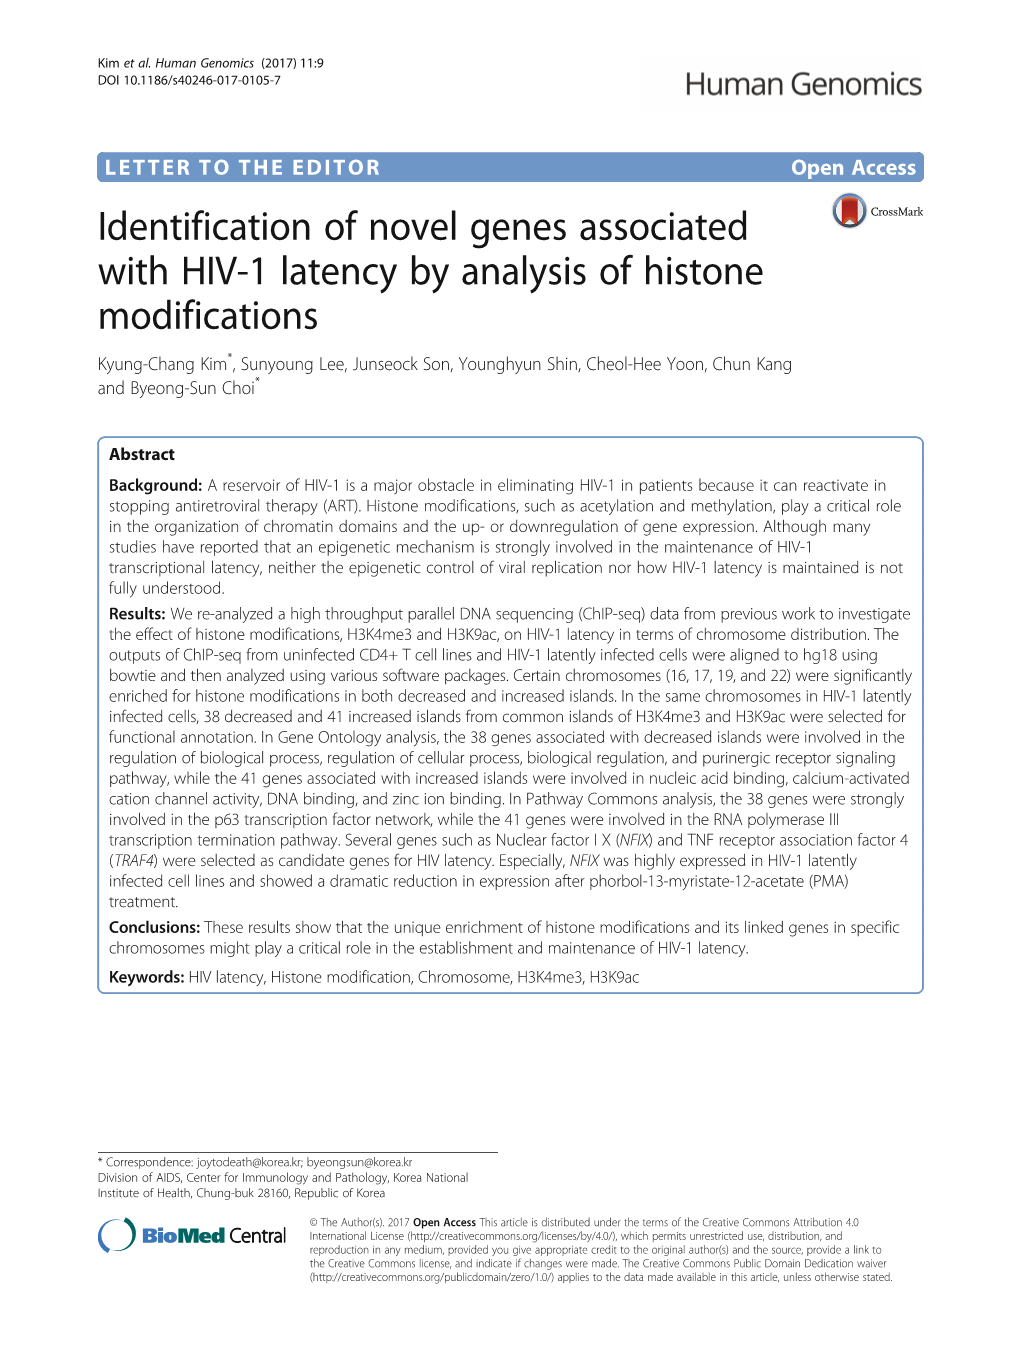 Identification of Novel Genes Associated with HIV-1 Latency By